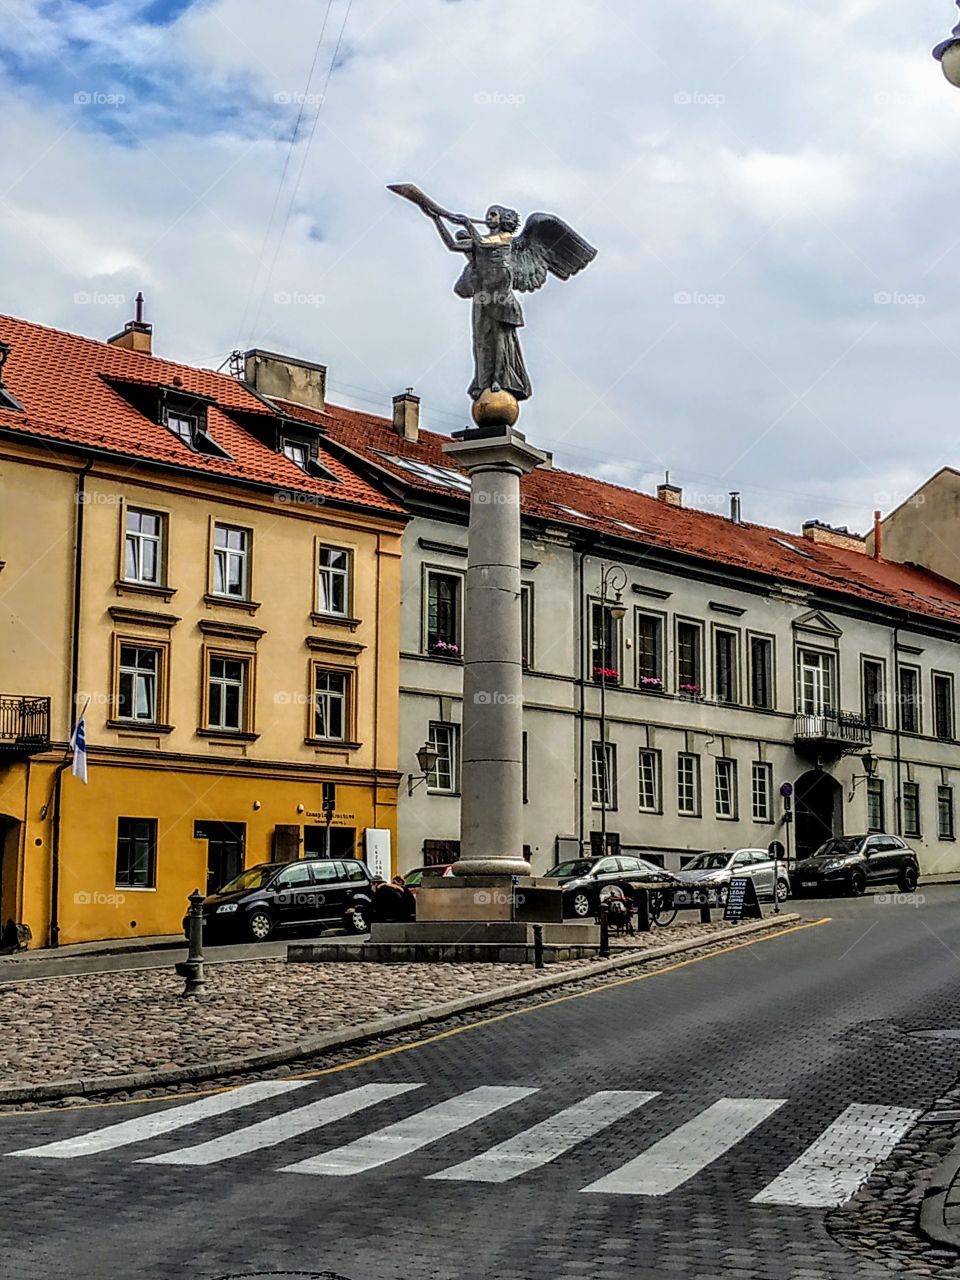 Angel in the center of the square. (Lithuania, Vilnius, July, 2019).